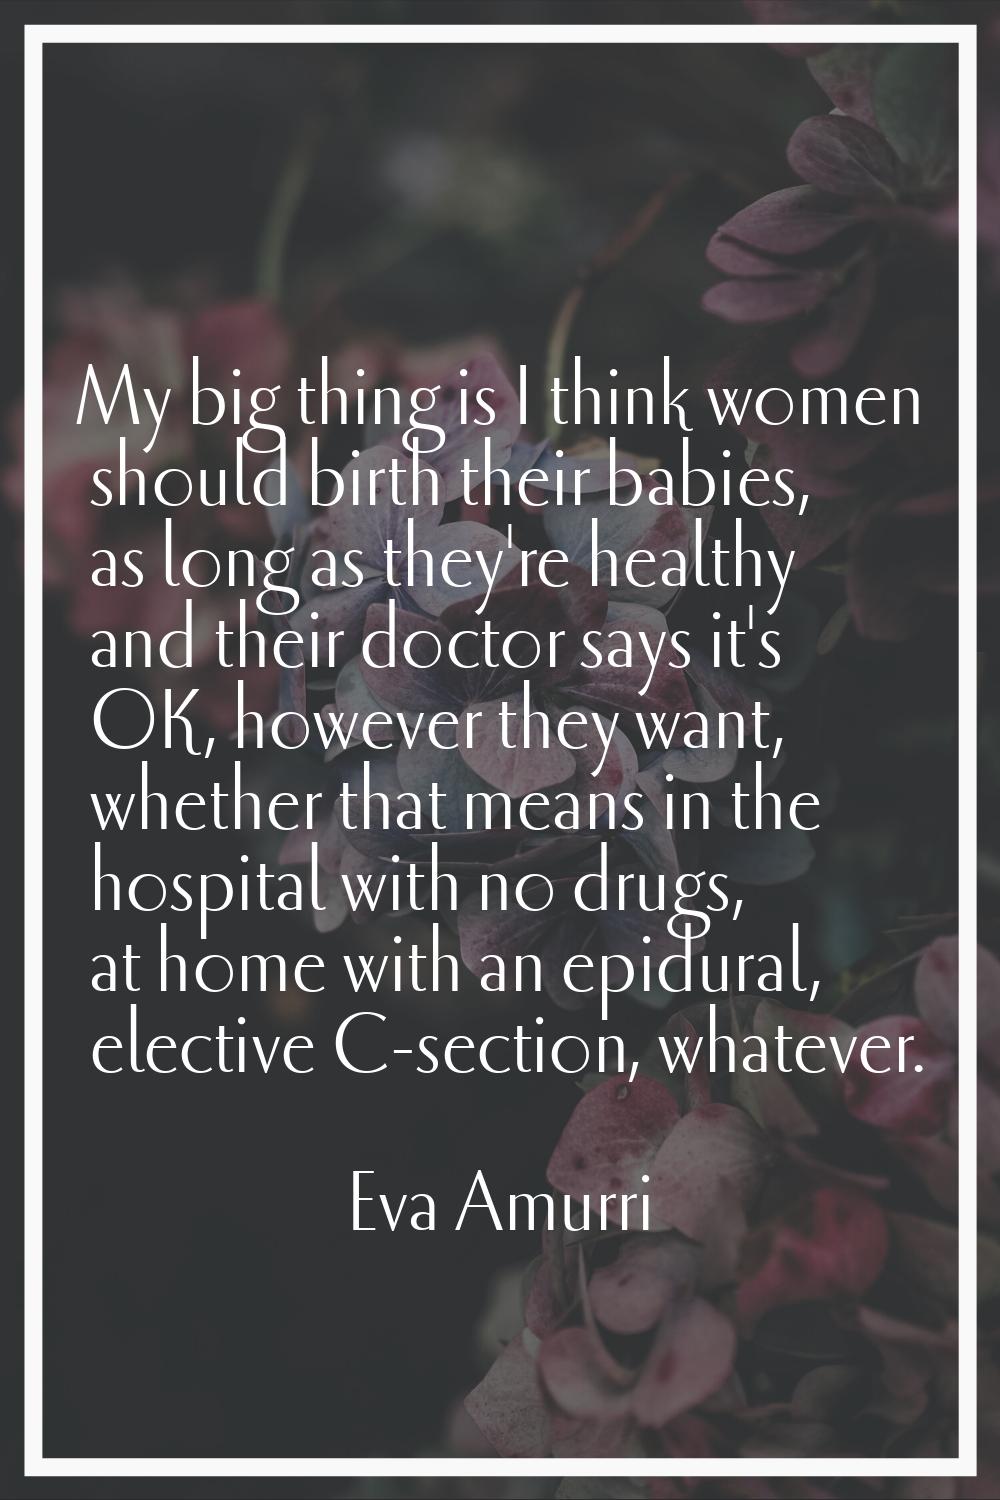 My big thing is I think women should birth their babies, as long as they're healthy and their docto